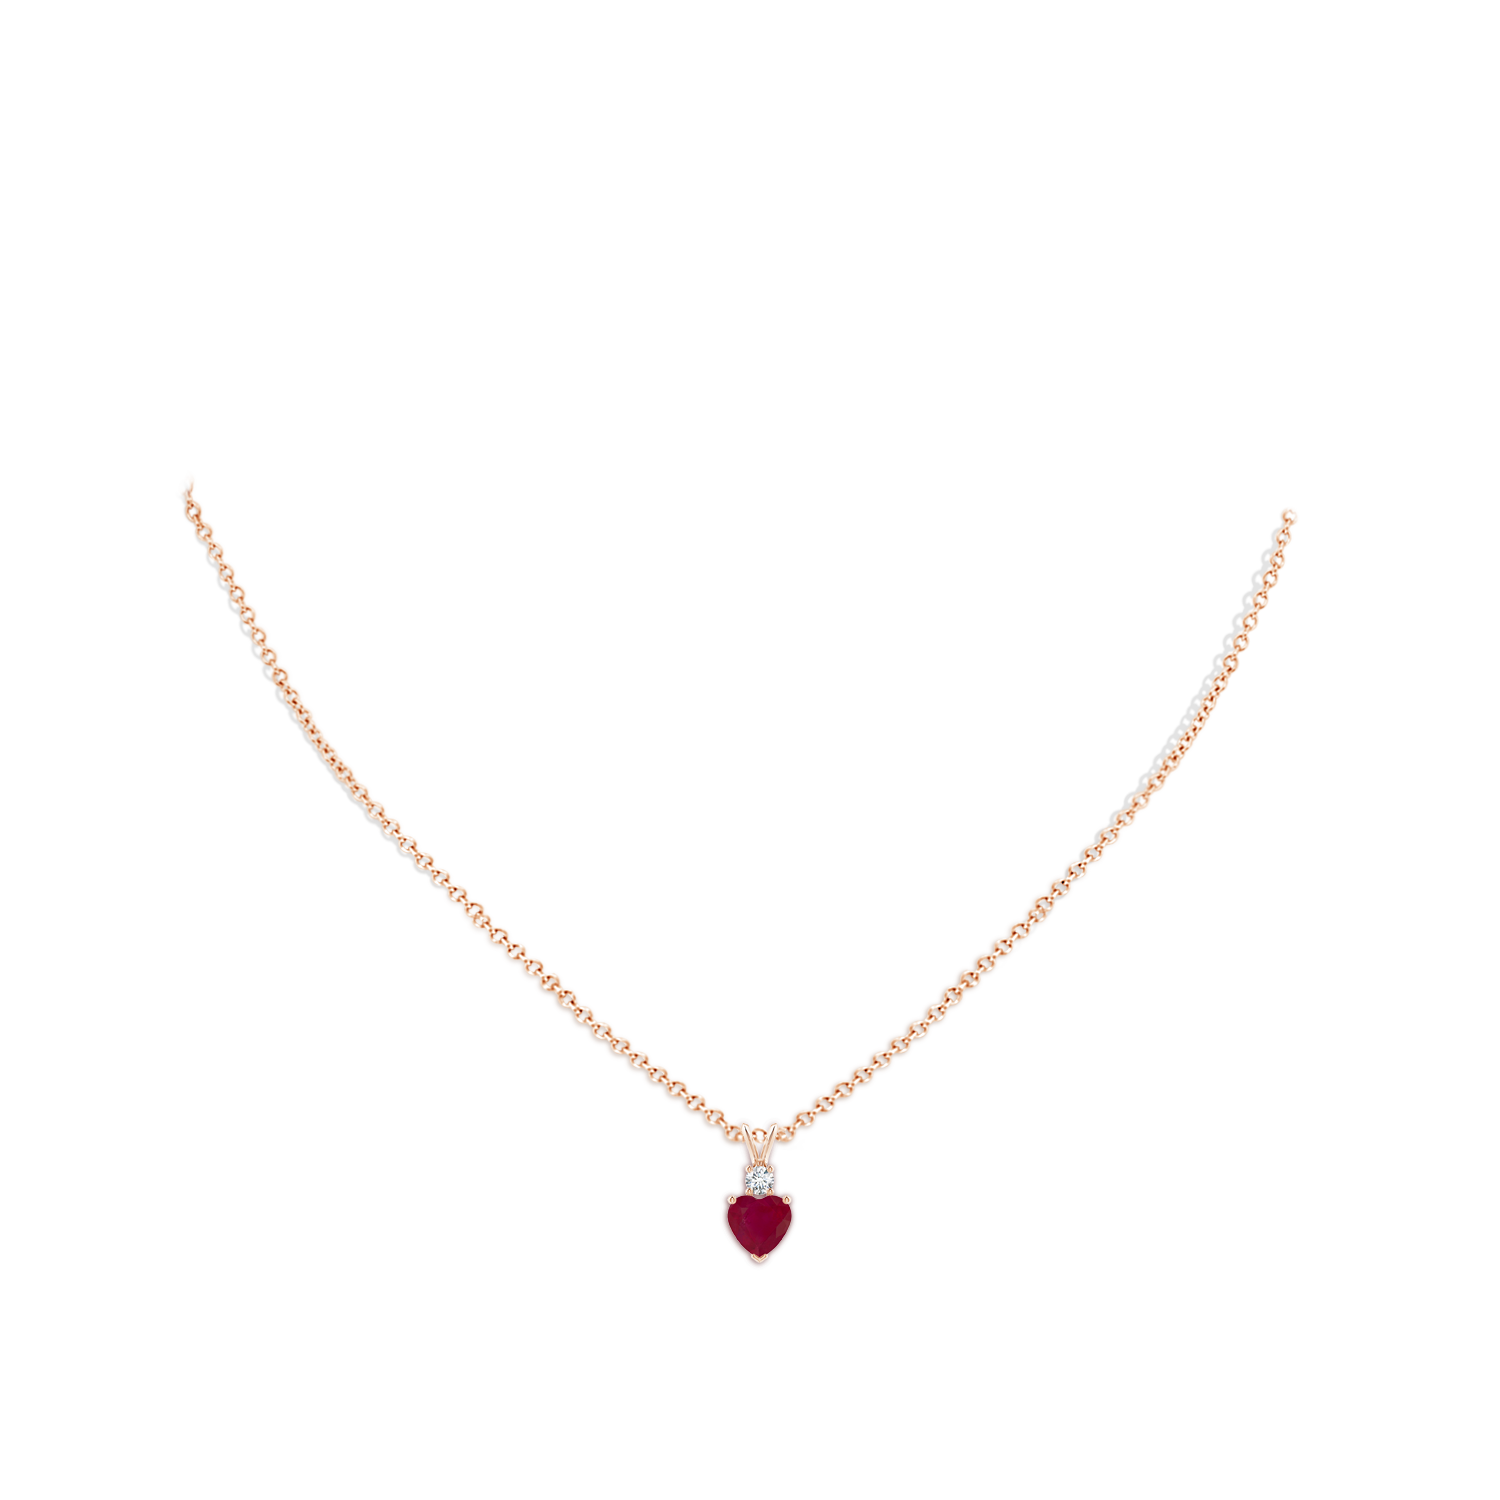 A - Ruby / 0.88 CT / 14 KT Rose Gold